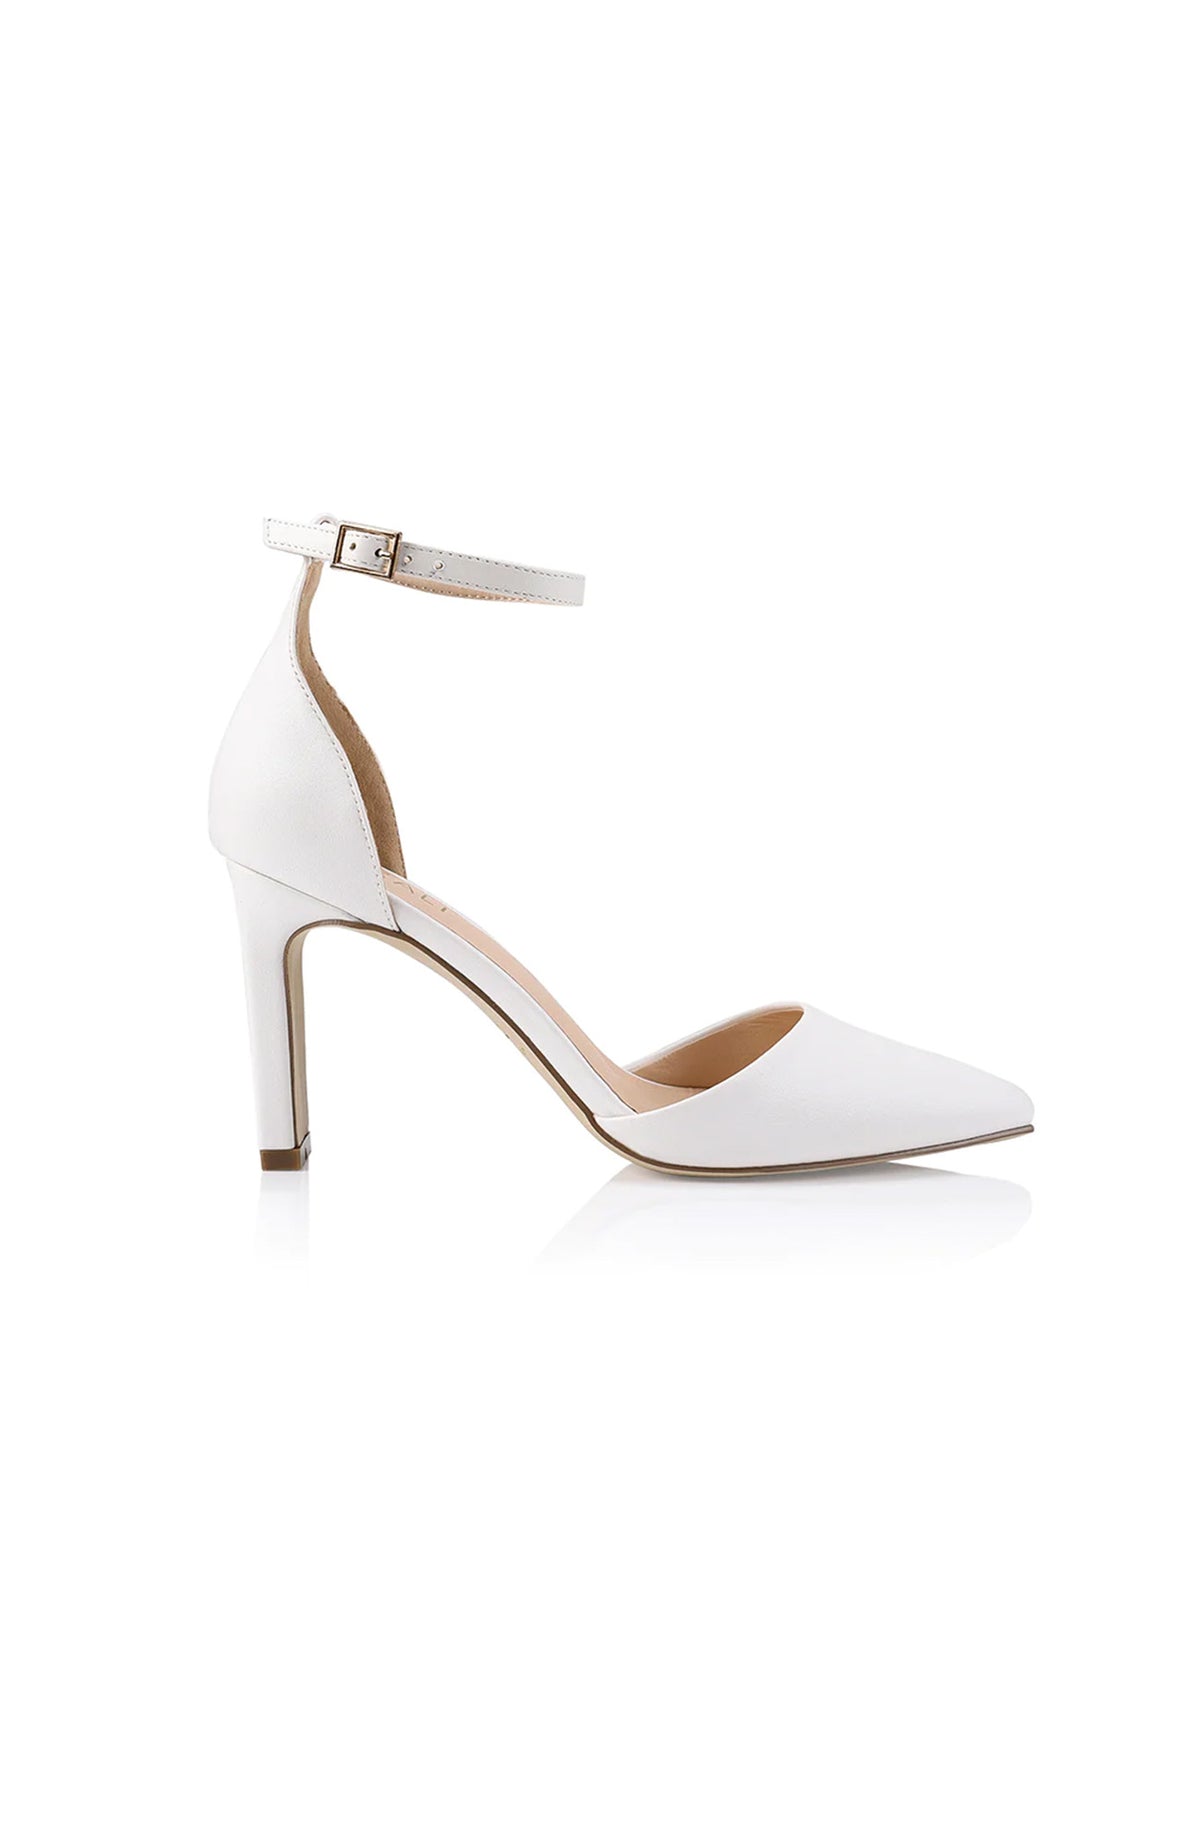 Kitra Closed Toe Heels - White Smooth – Verali Shoes